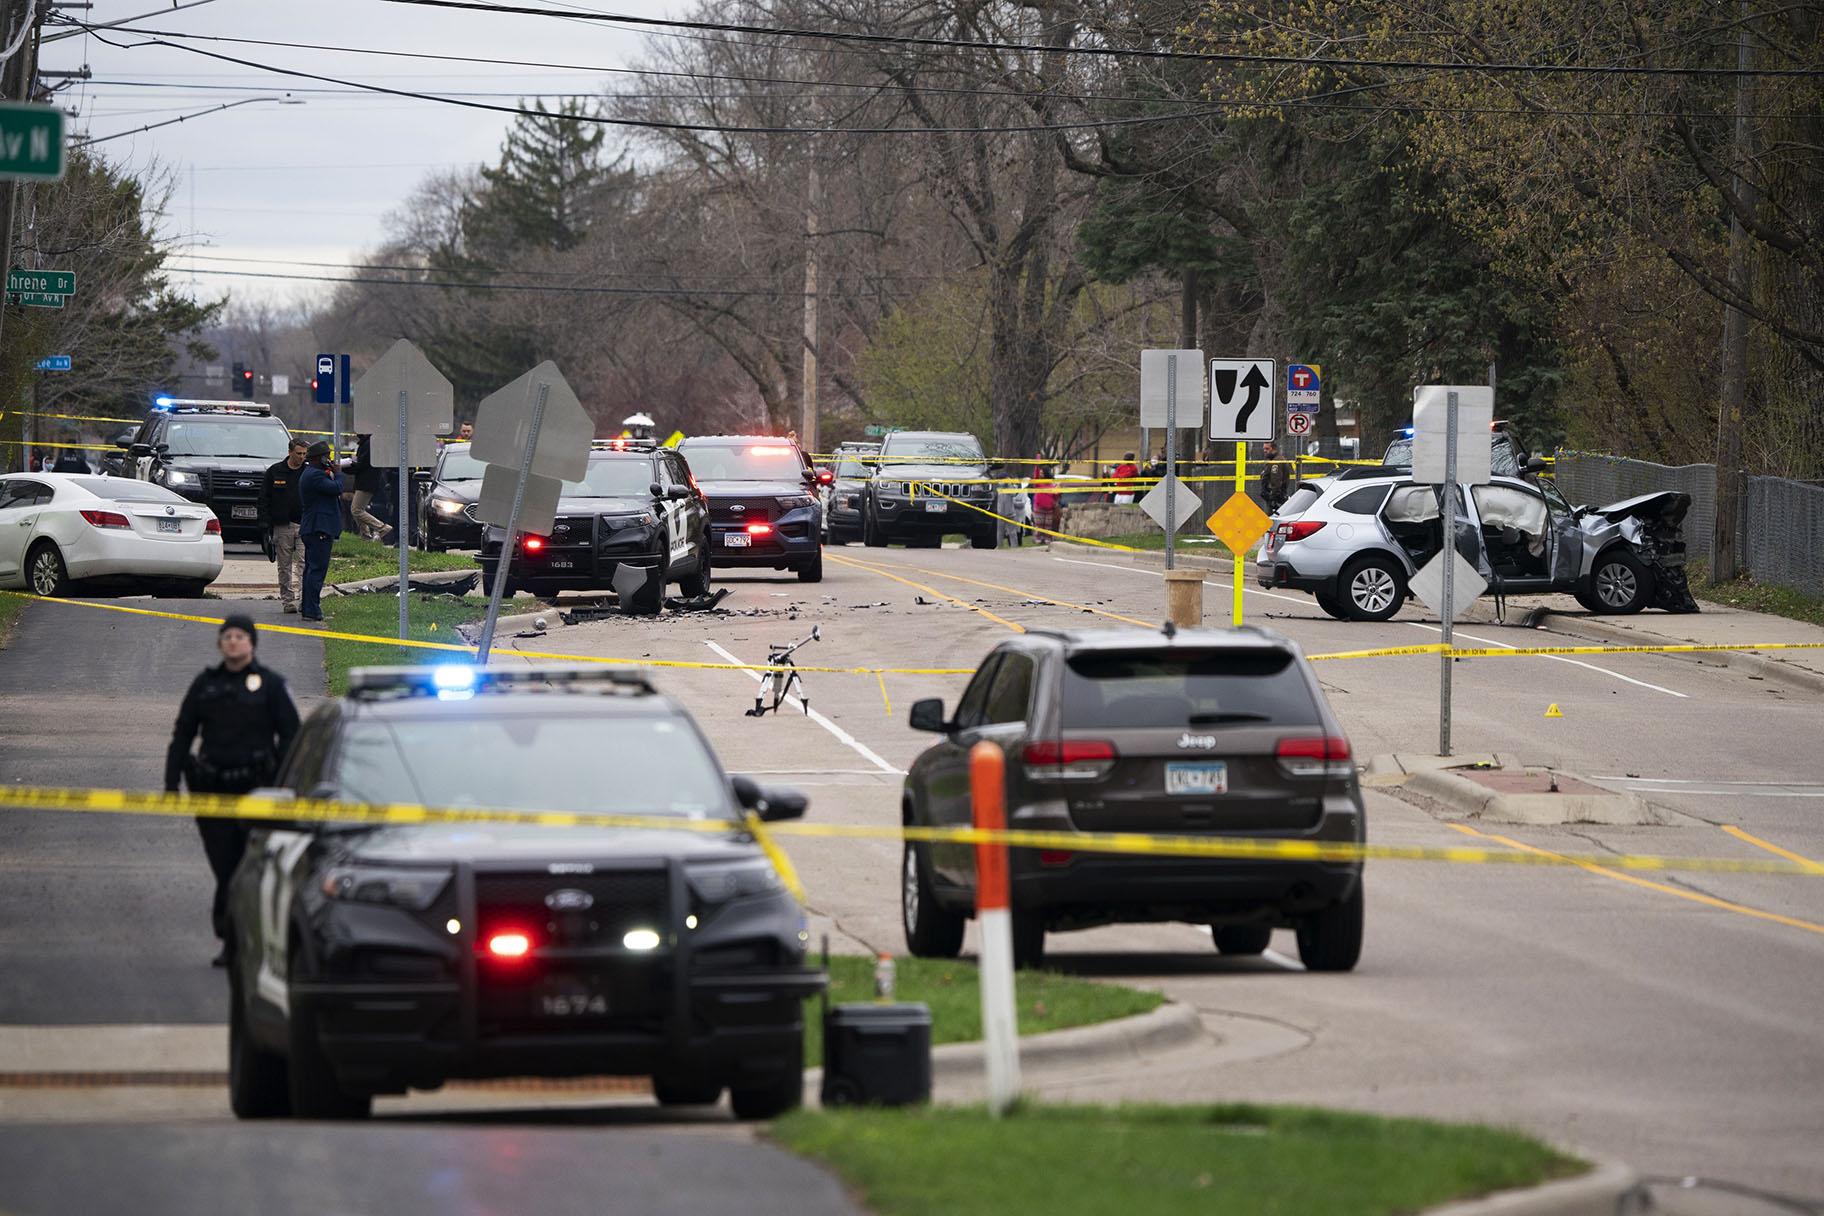 Authorities work the scene at the site of a shooting involving a police officer, Sunday, April 11, 2021, in Brooklyn Center, Minn. (Jeff Wheeler / Star Tribune via AP)